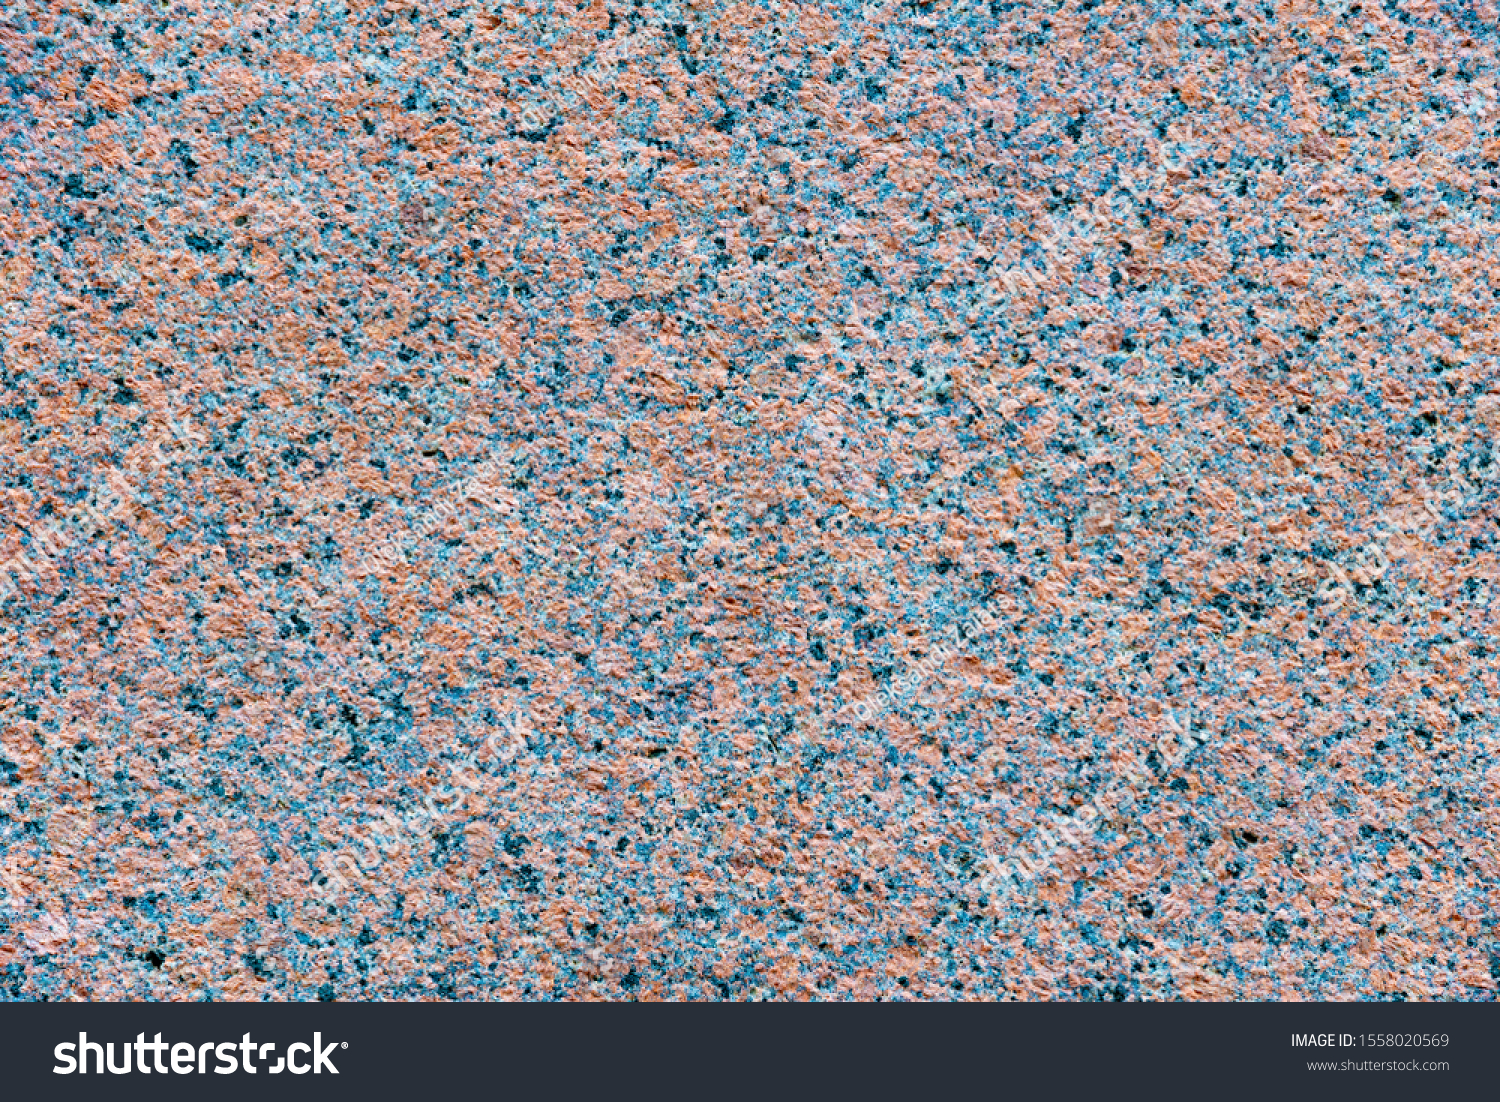 Granite texture, red base color with blue, black and gray spots. Floor material, wall material, construction material #1558020569